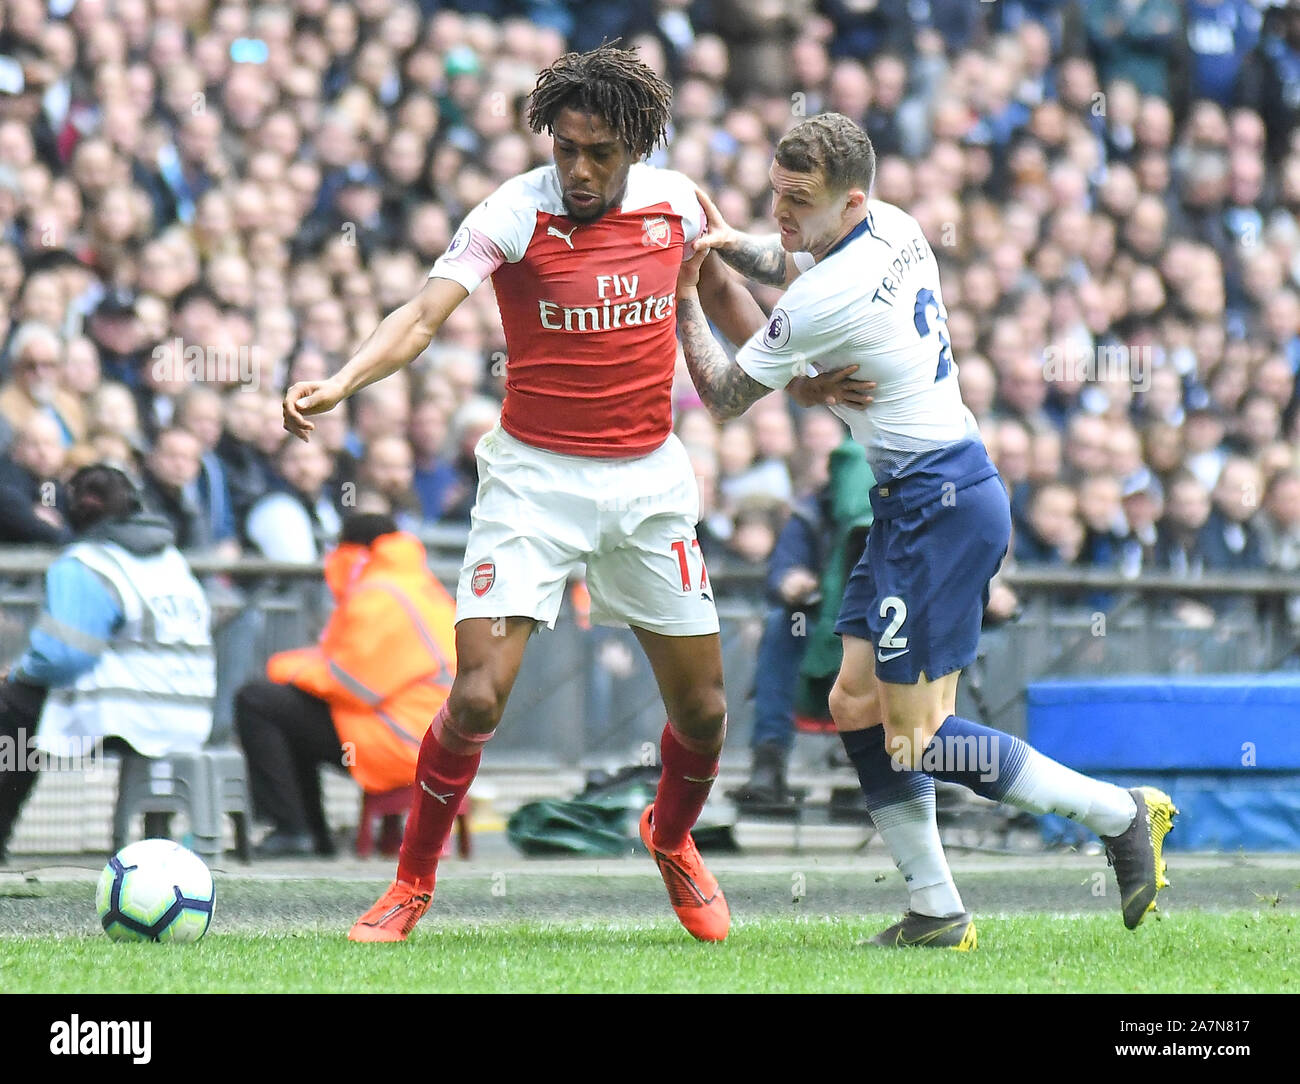 LONDON, ENGLAND - MARCH 2, 2019: Alex Iwobi of Arsenal and Kieran Trippier of Tottenham pictured during the 2018/19 Premier League game between Tottenham Hotspur and Arsenal FC at Wembley Stadium. Stock Photo